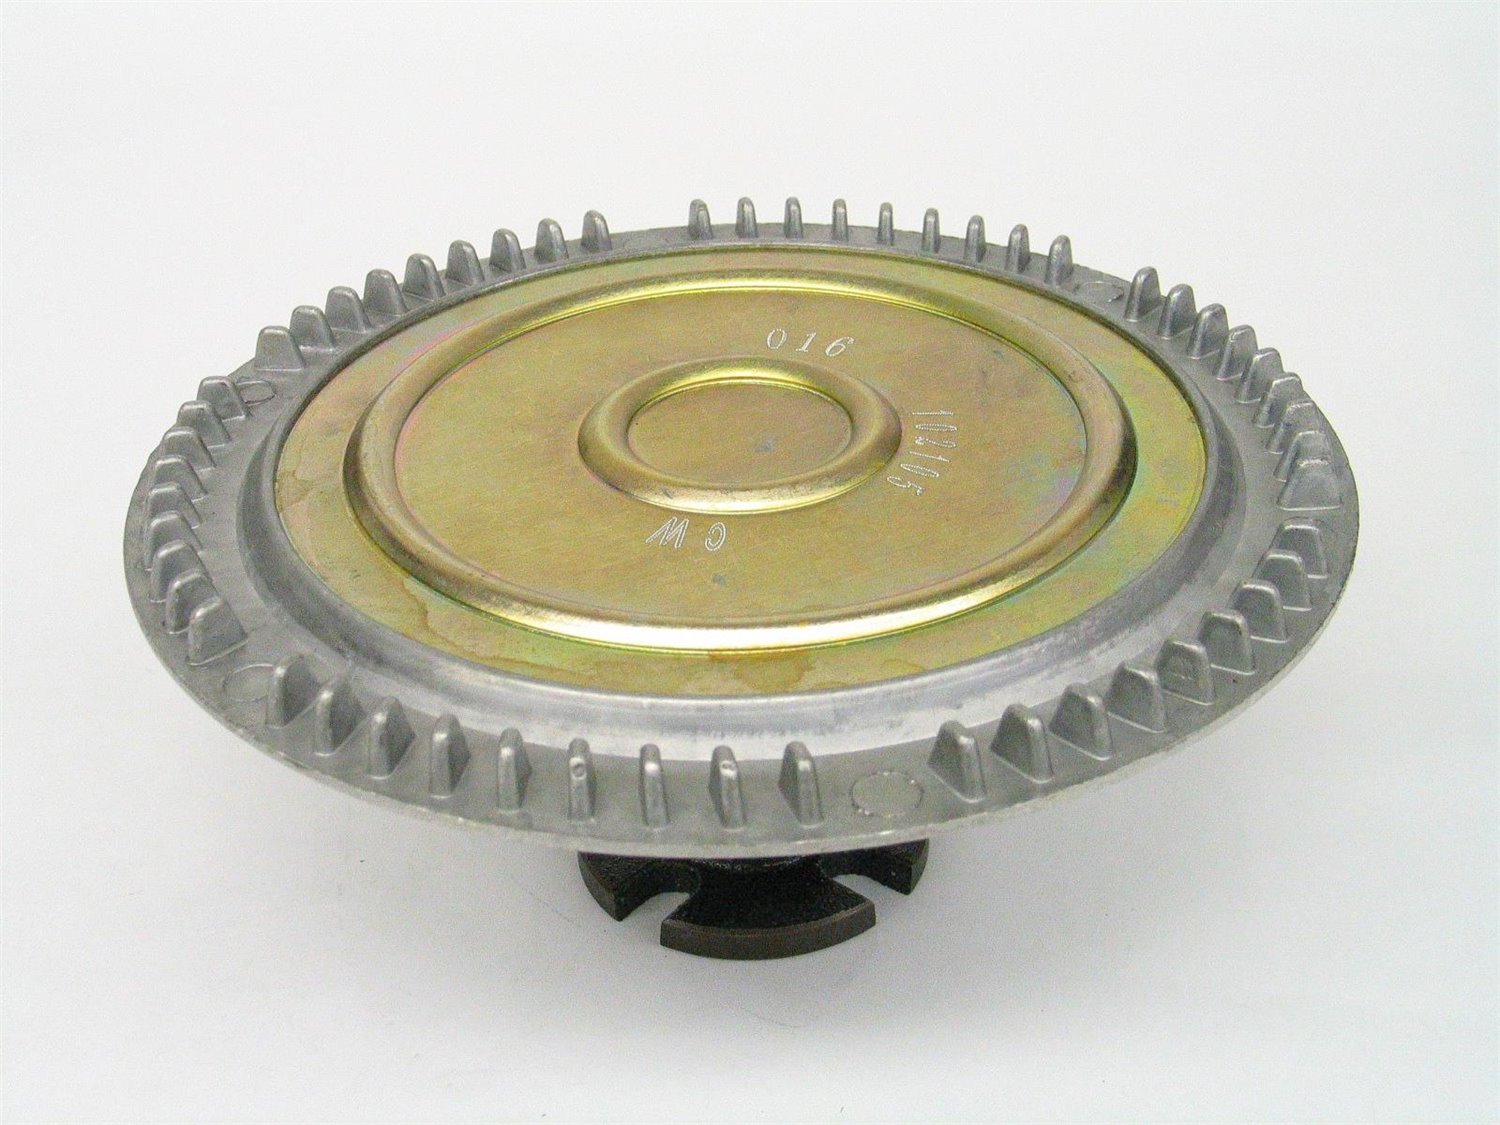 Standard Duty Non-Thermal Fan Clutch for 1958-1979 Ford/GM L6/V8